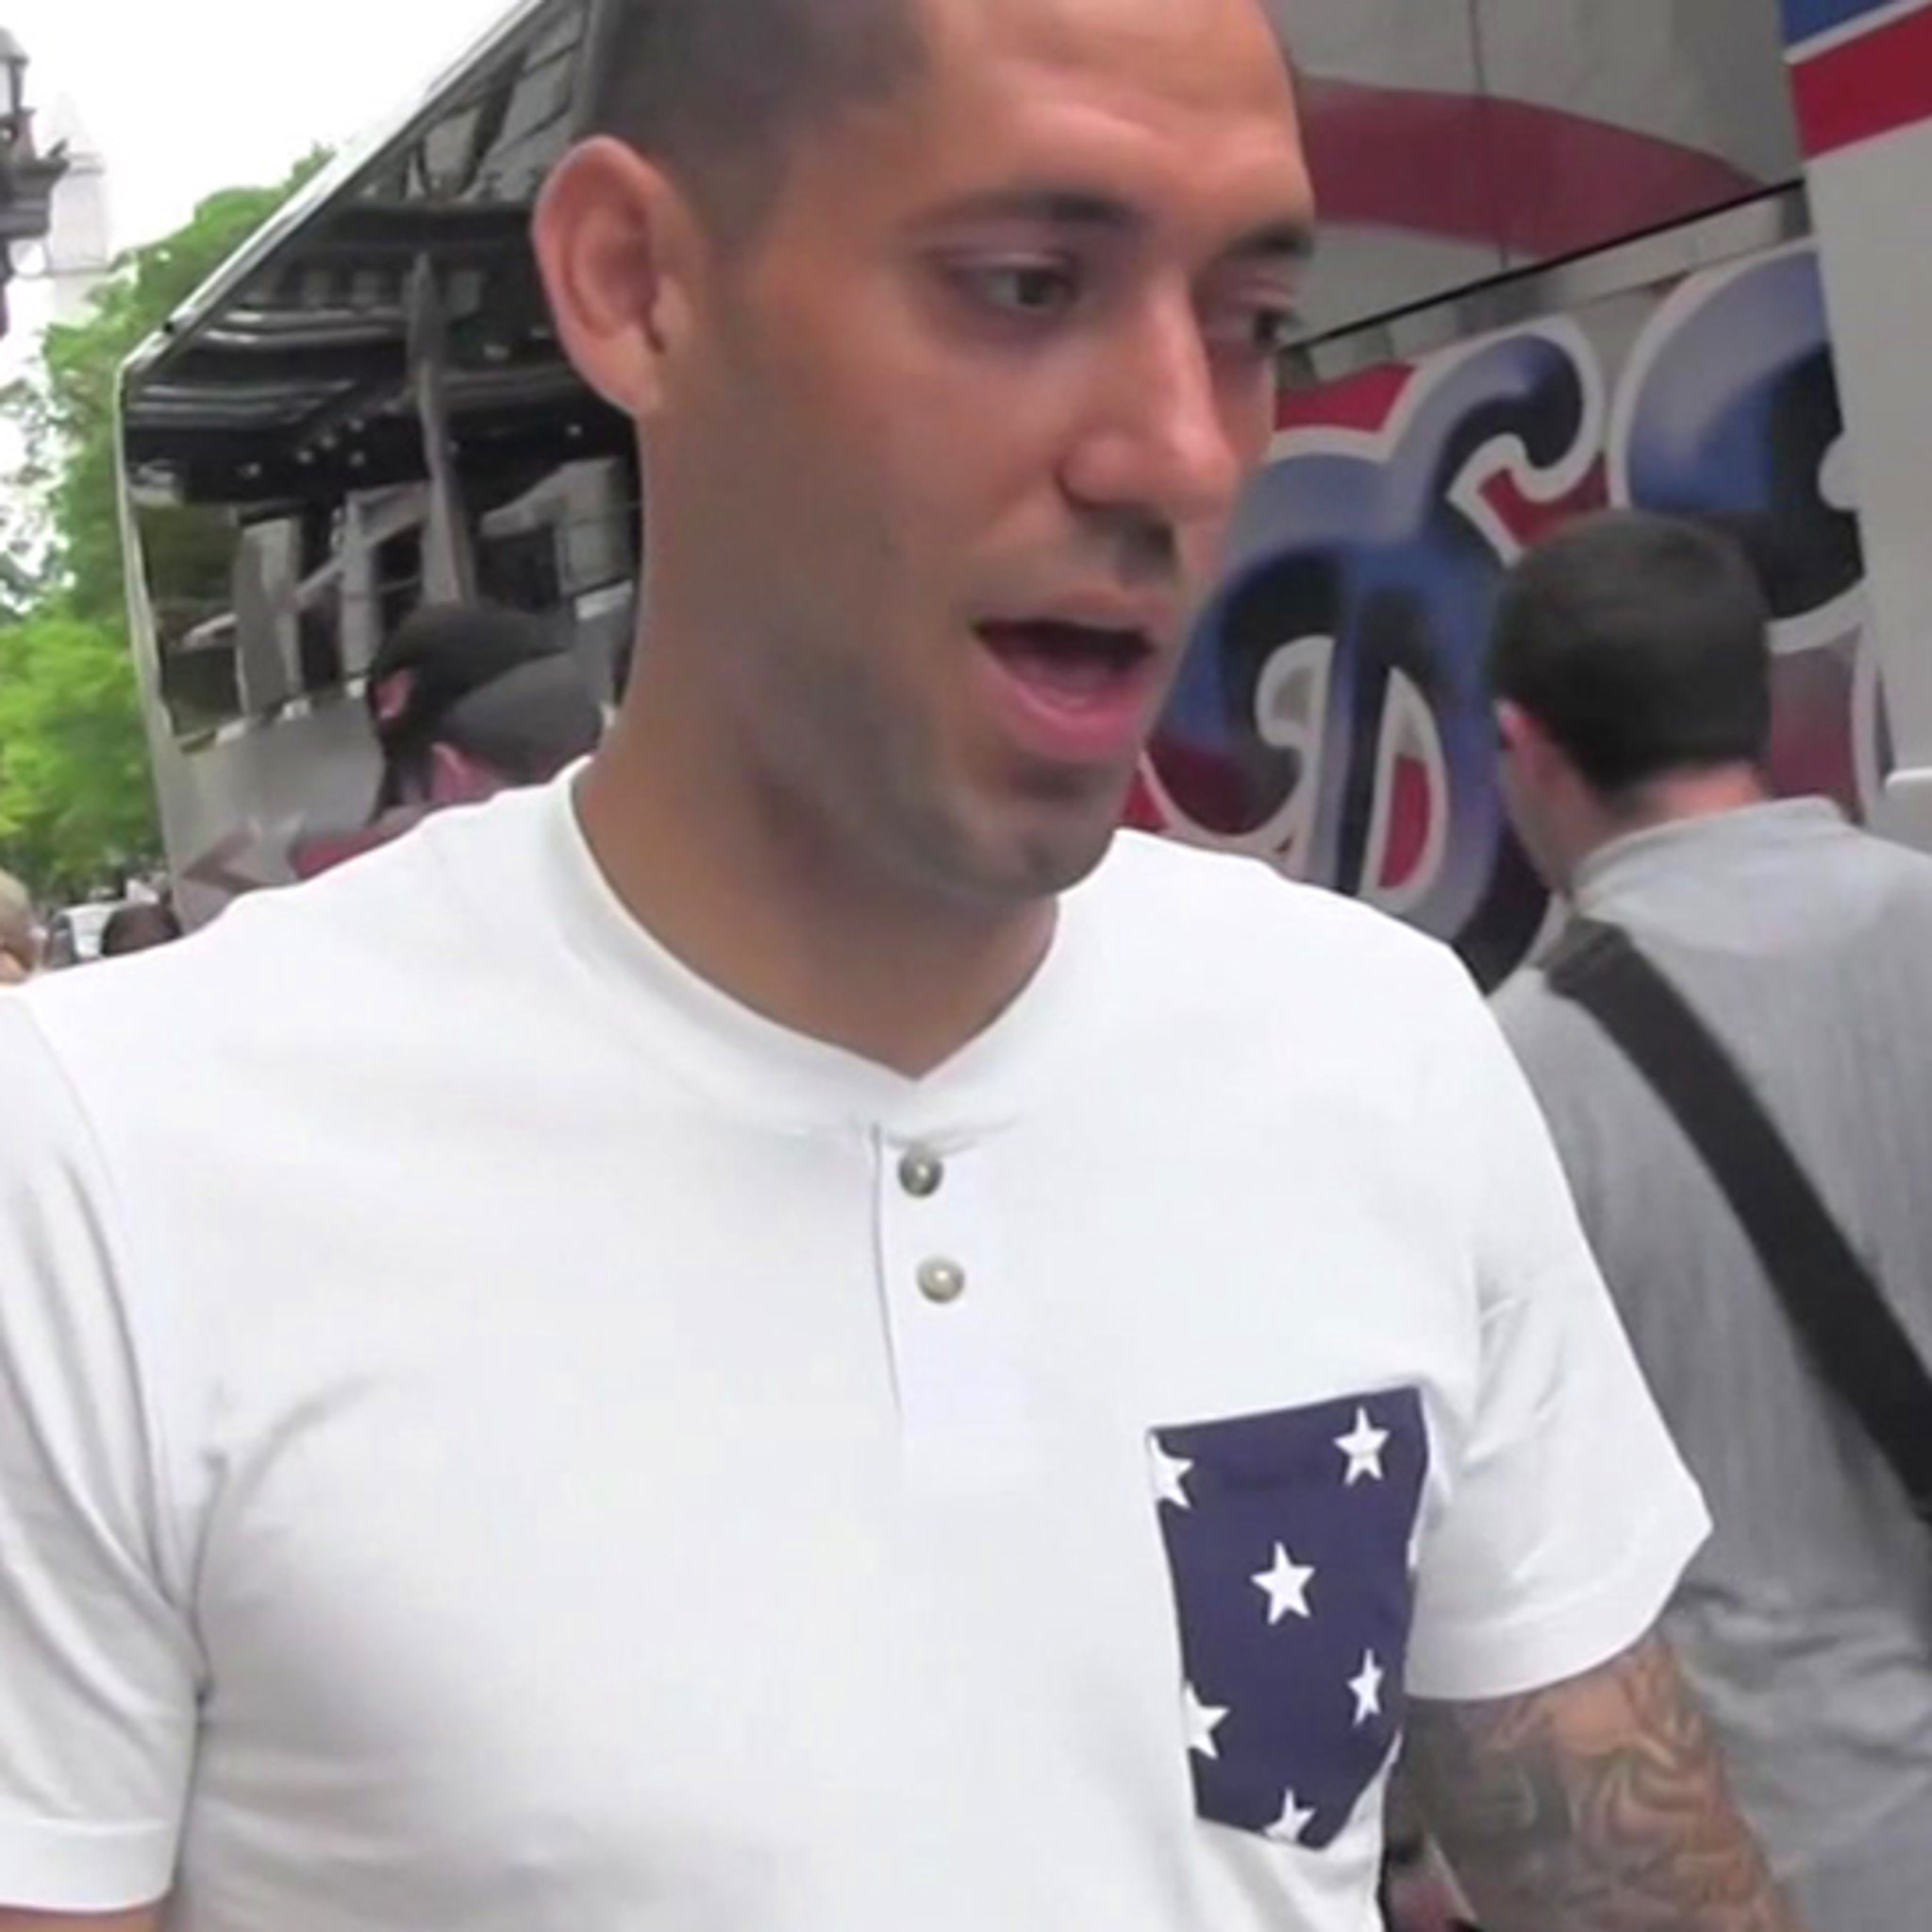 Clint Dempsey retires from U.S. national team and professional soccer